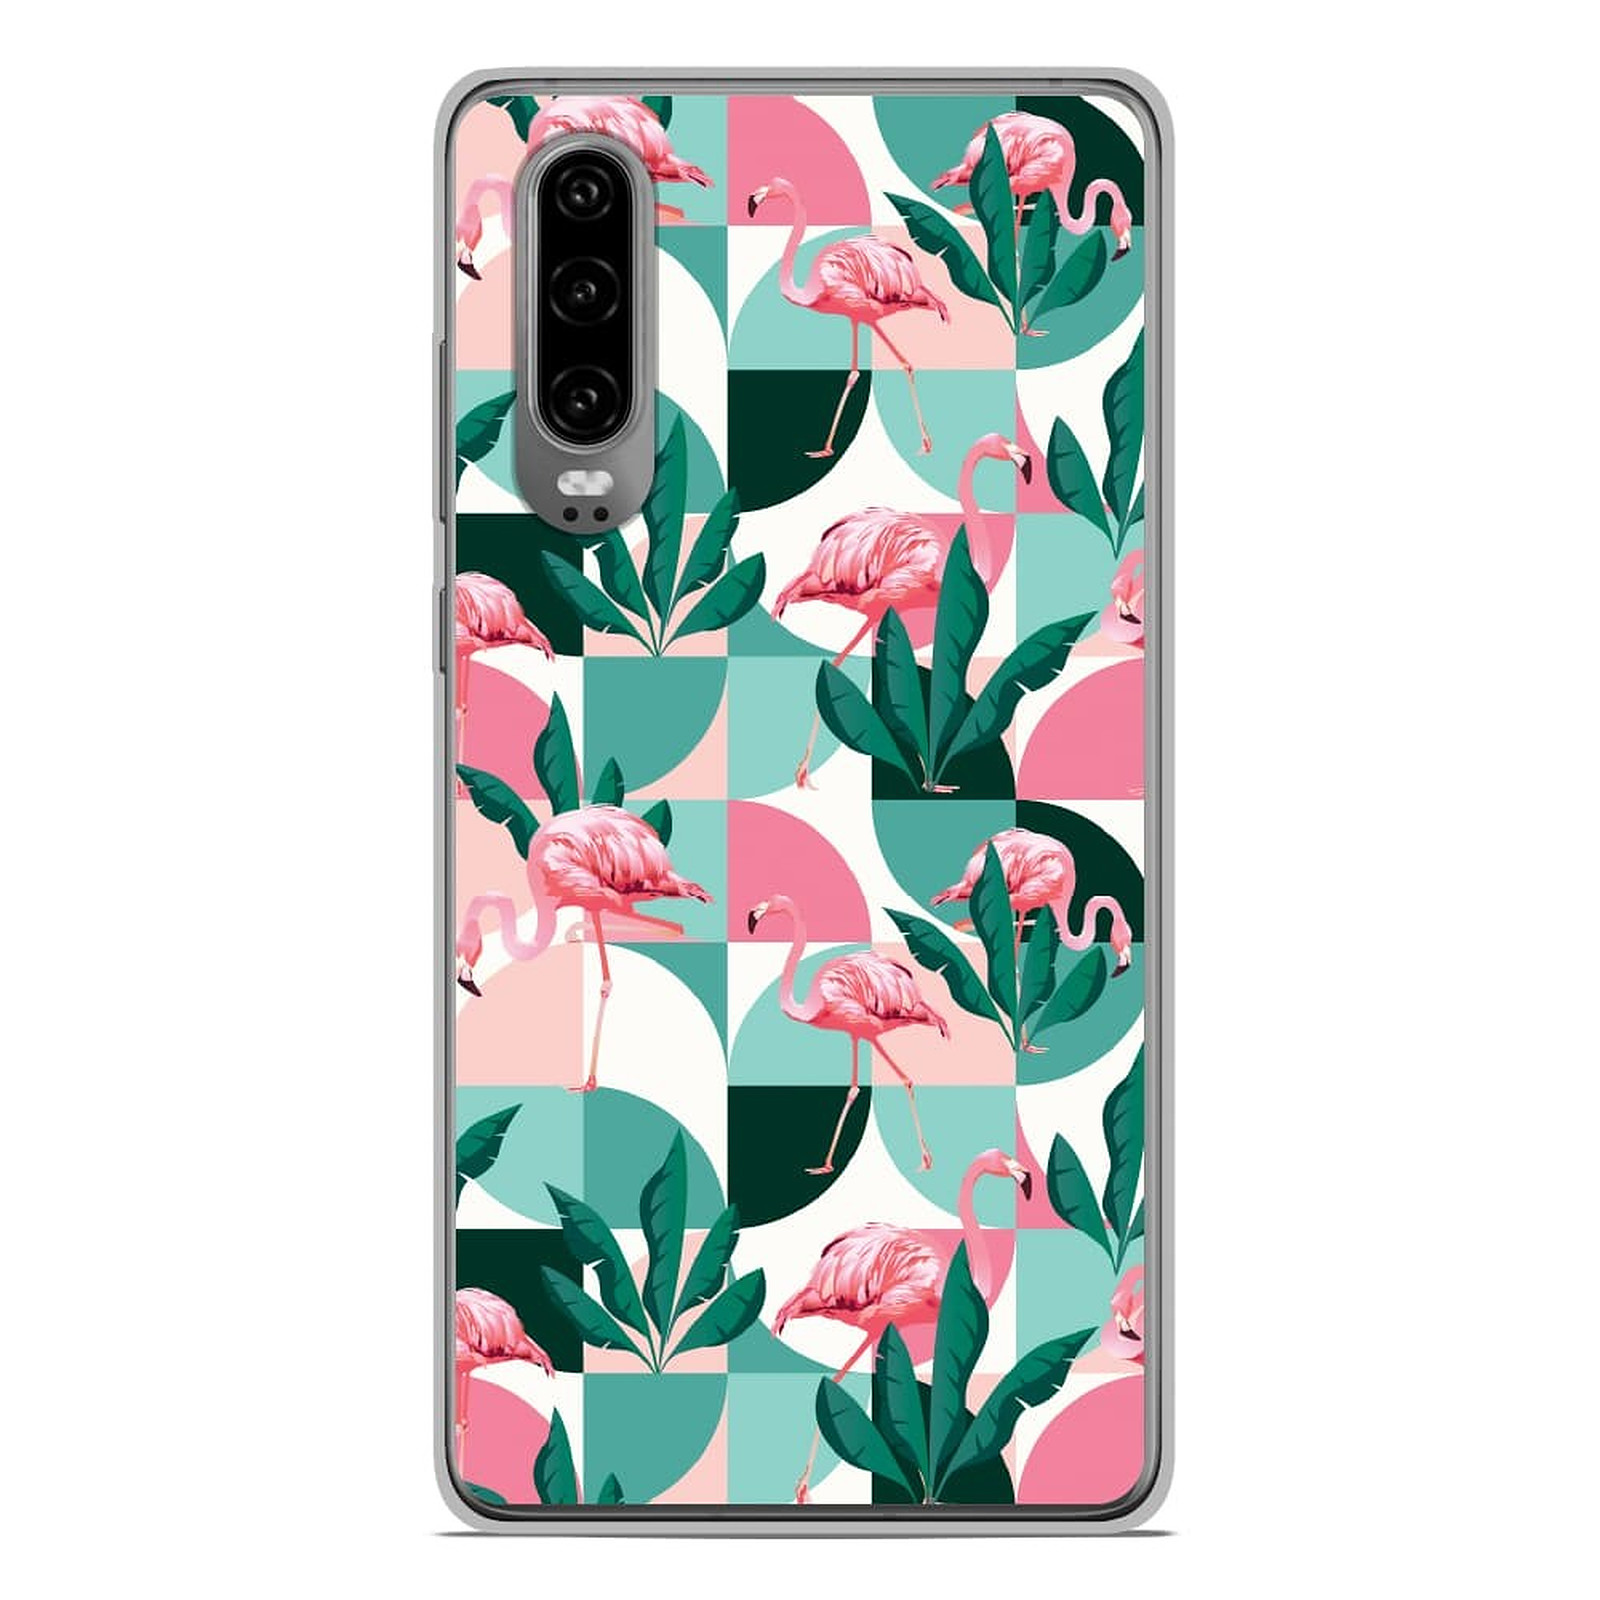 1001 Coques Coque silicone gel Huawei P30 motif Flamants Roses ge´ome´trique - Coque telephone 1001Coques